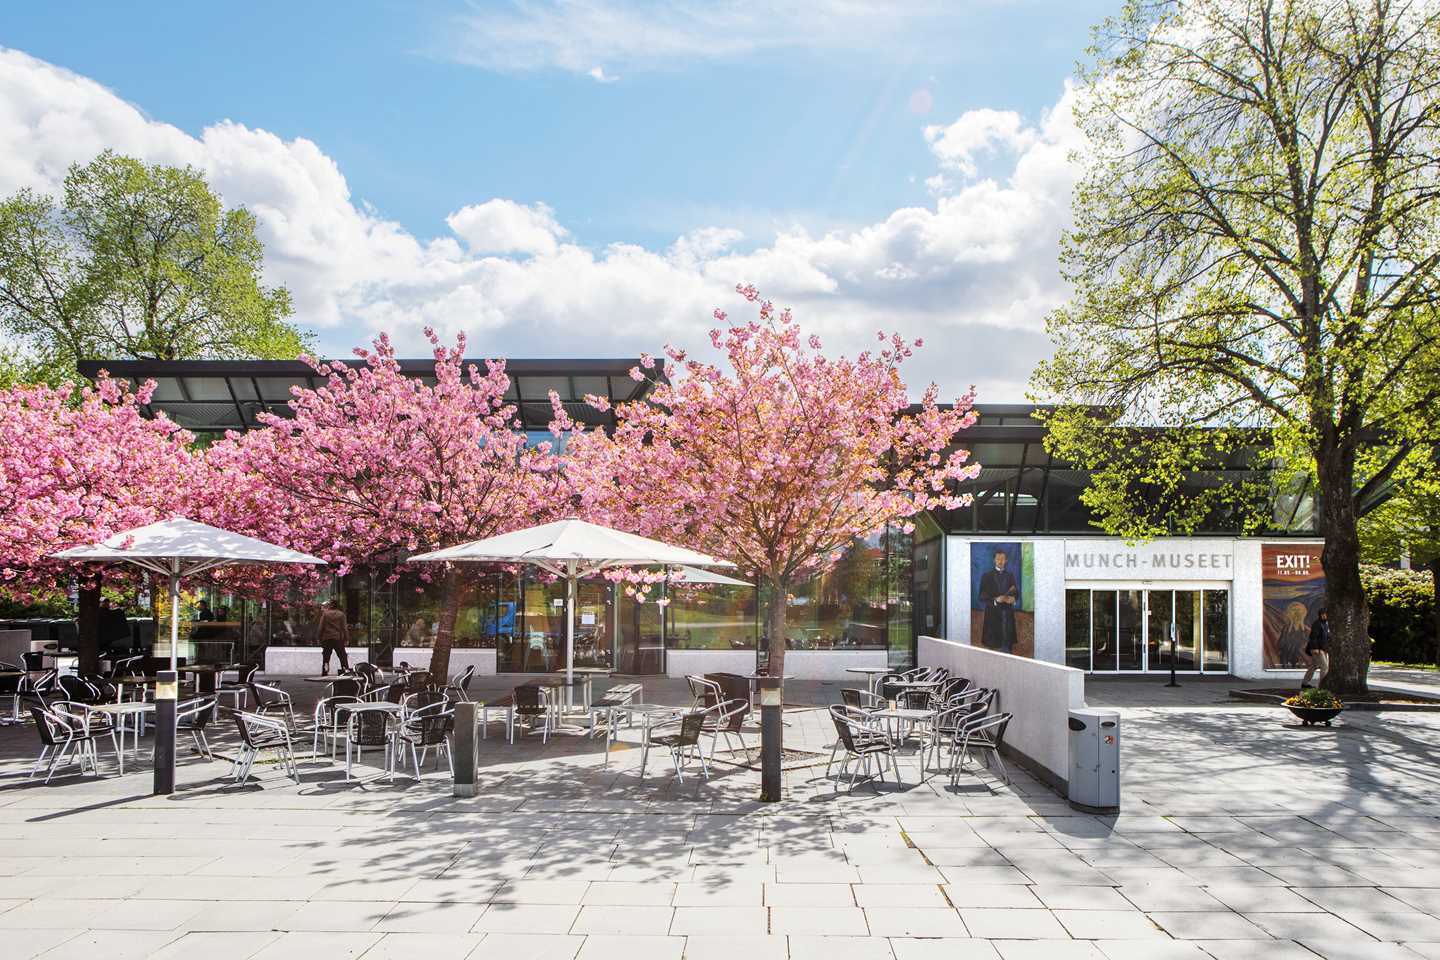  Munchmuseet at Tøyen in May 2019, with the new entrance section from 1994, and the beautiful Japanese cherry trees by the café’s outdoor seating area. Photo @ Munchmuseet